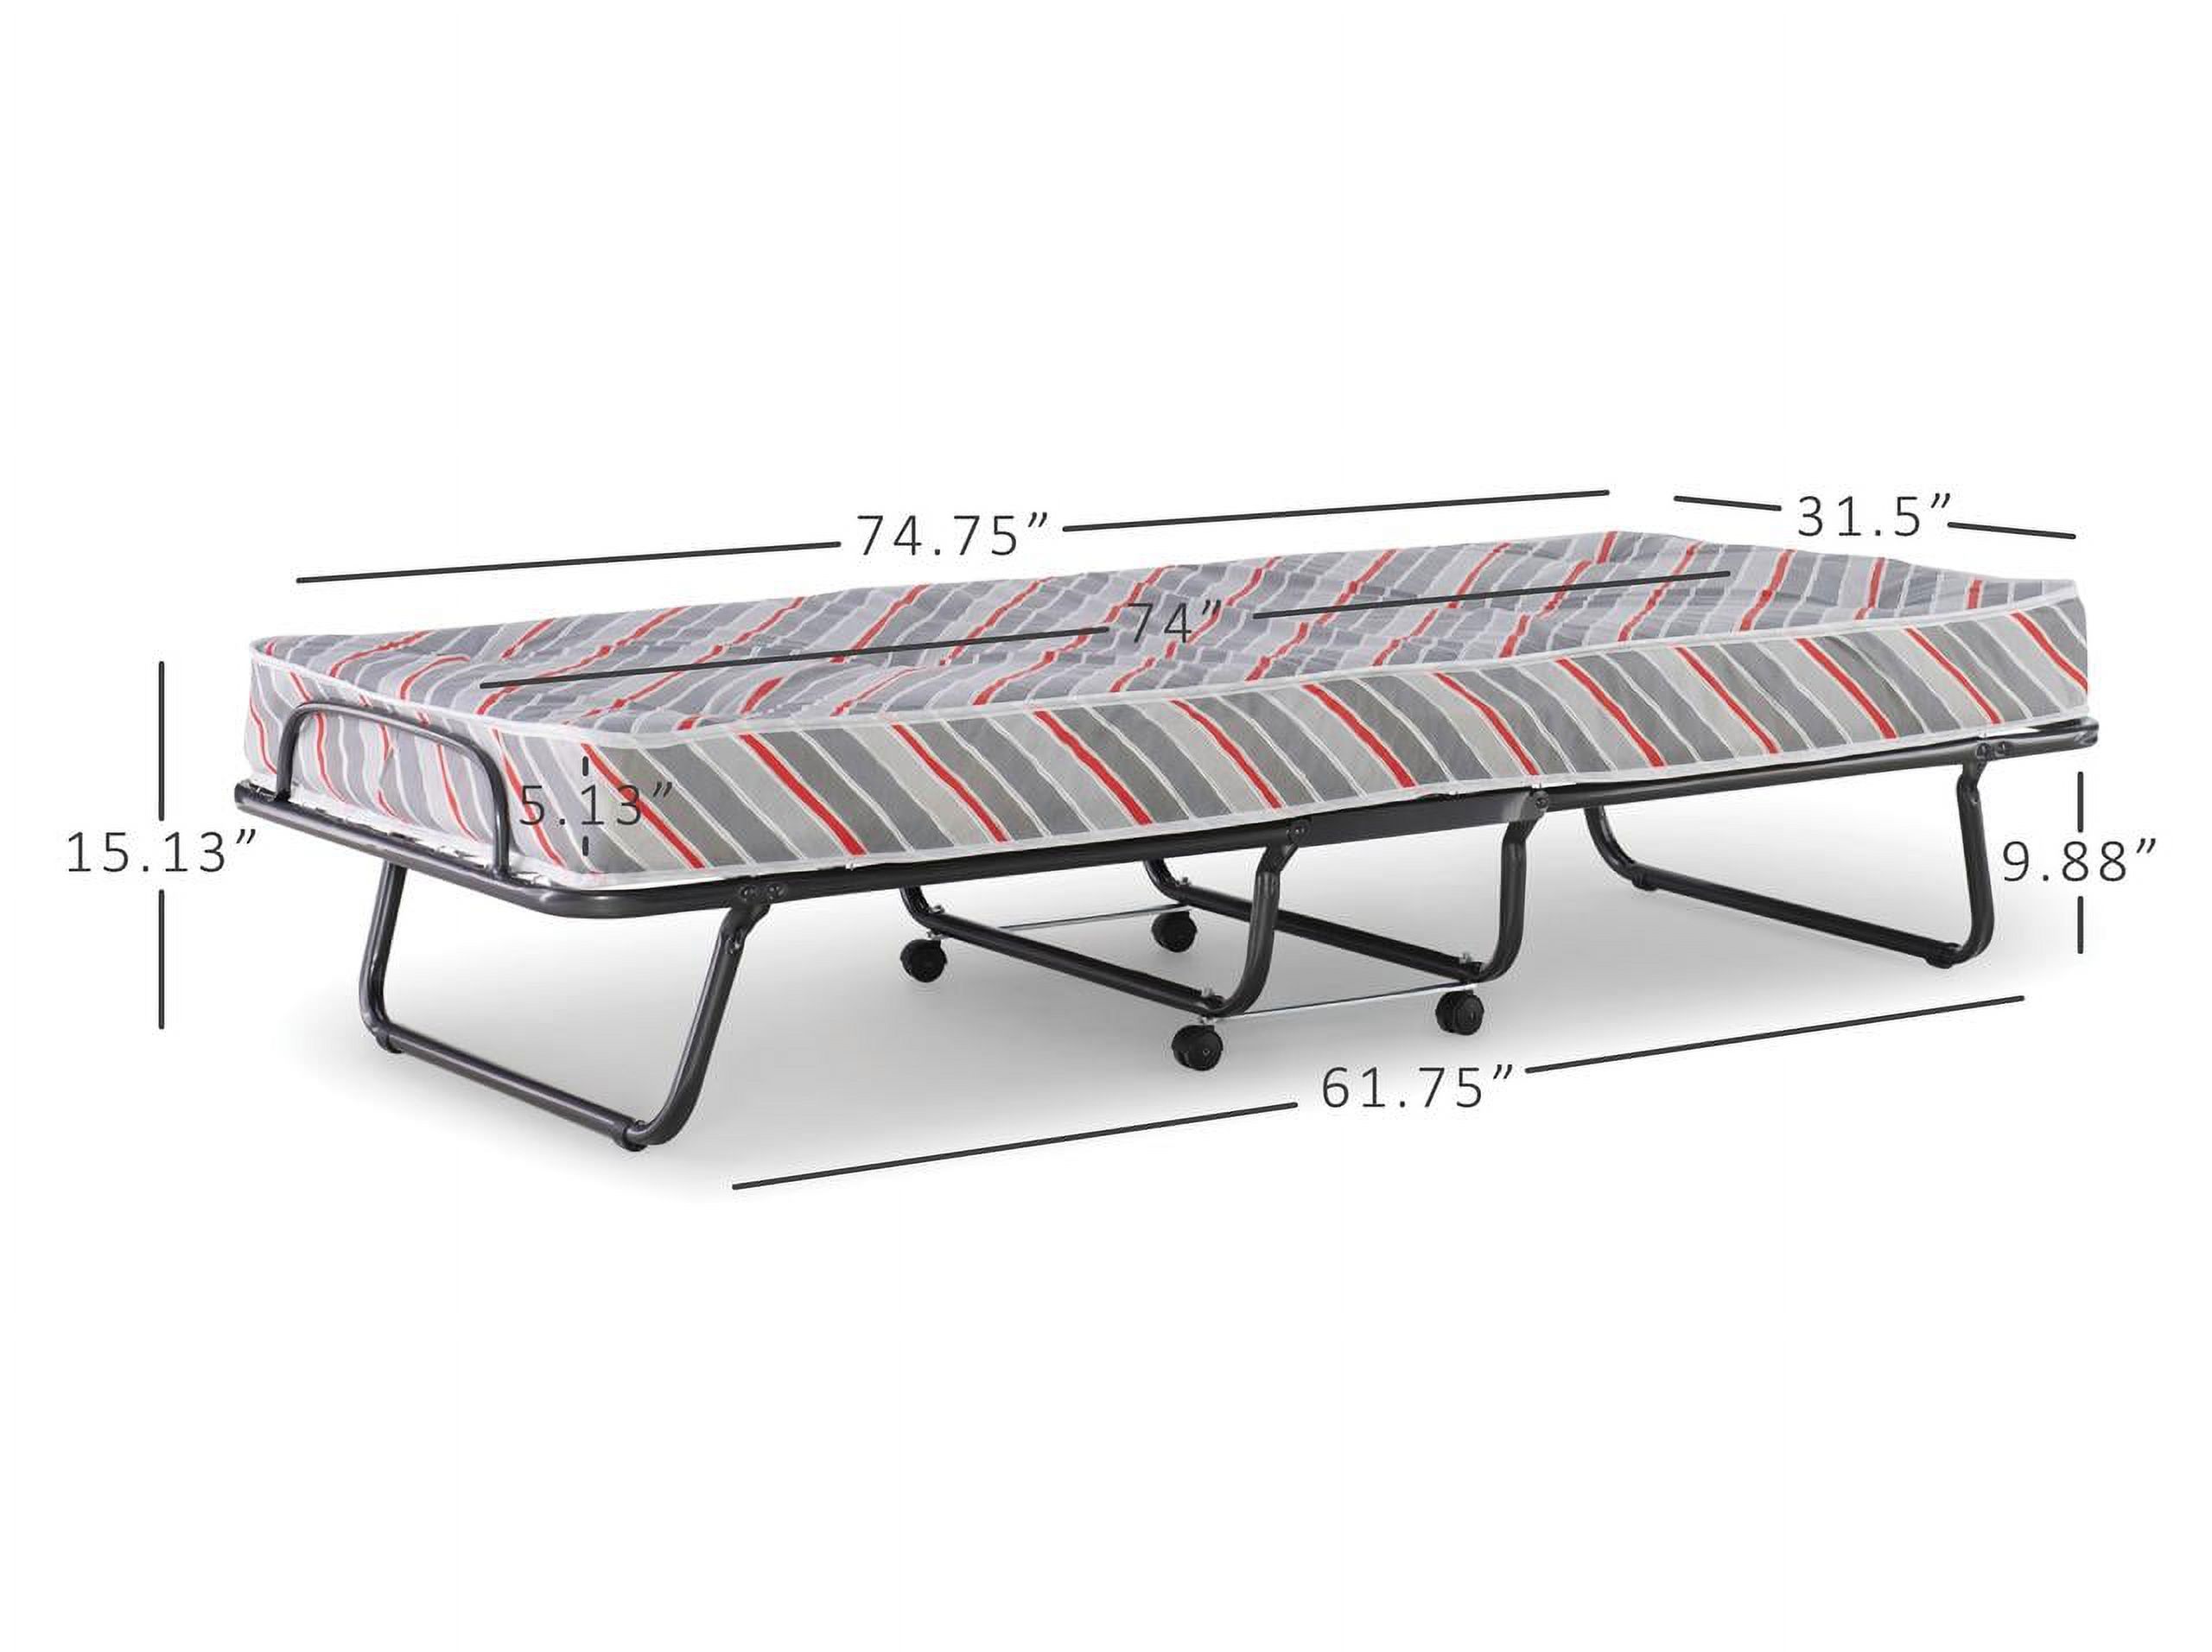 Linon Torino Folding Rollaway Guest Bed with 5" Innerspring Mattress, Cot - image 5 of 14